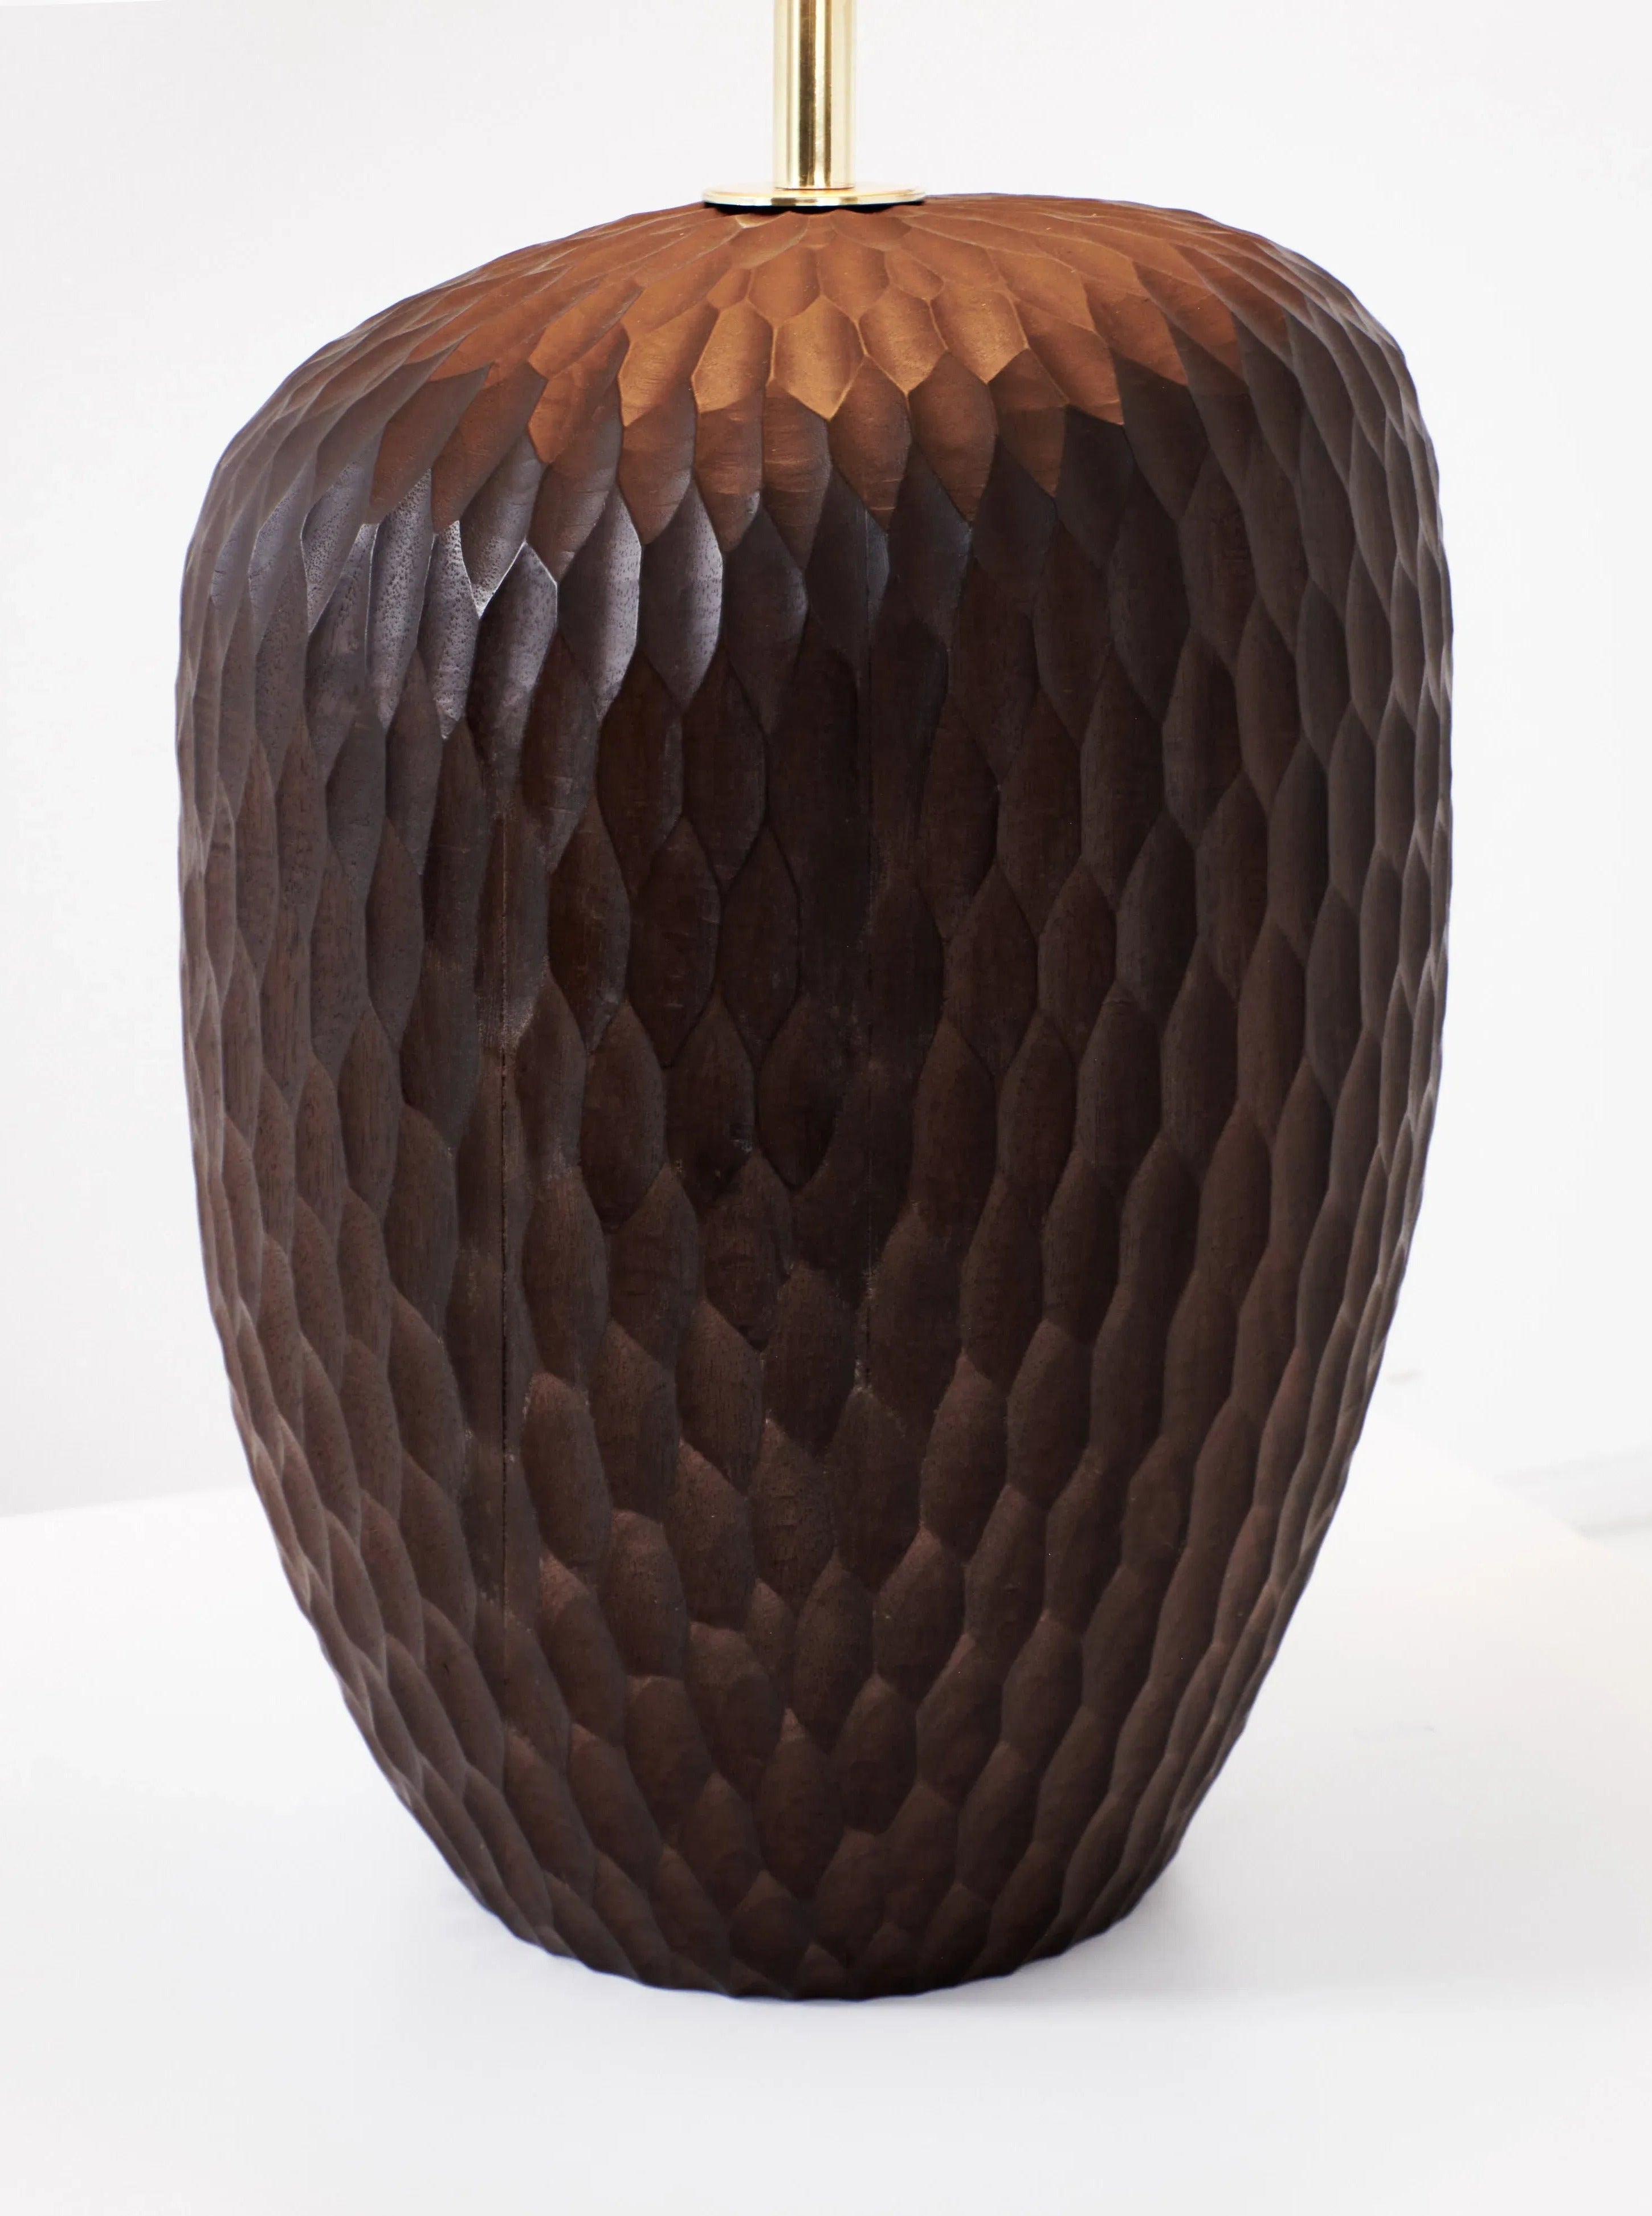 A close-up image of the Large Foz Lamp by Project 213A featuring a tall, dark wooden lamp base with a textured, faceted pattern. The solid wood has a rich brown color, and the top part of a gold-colored lamp rod is visible at the top. The background is a plain white surface.